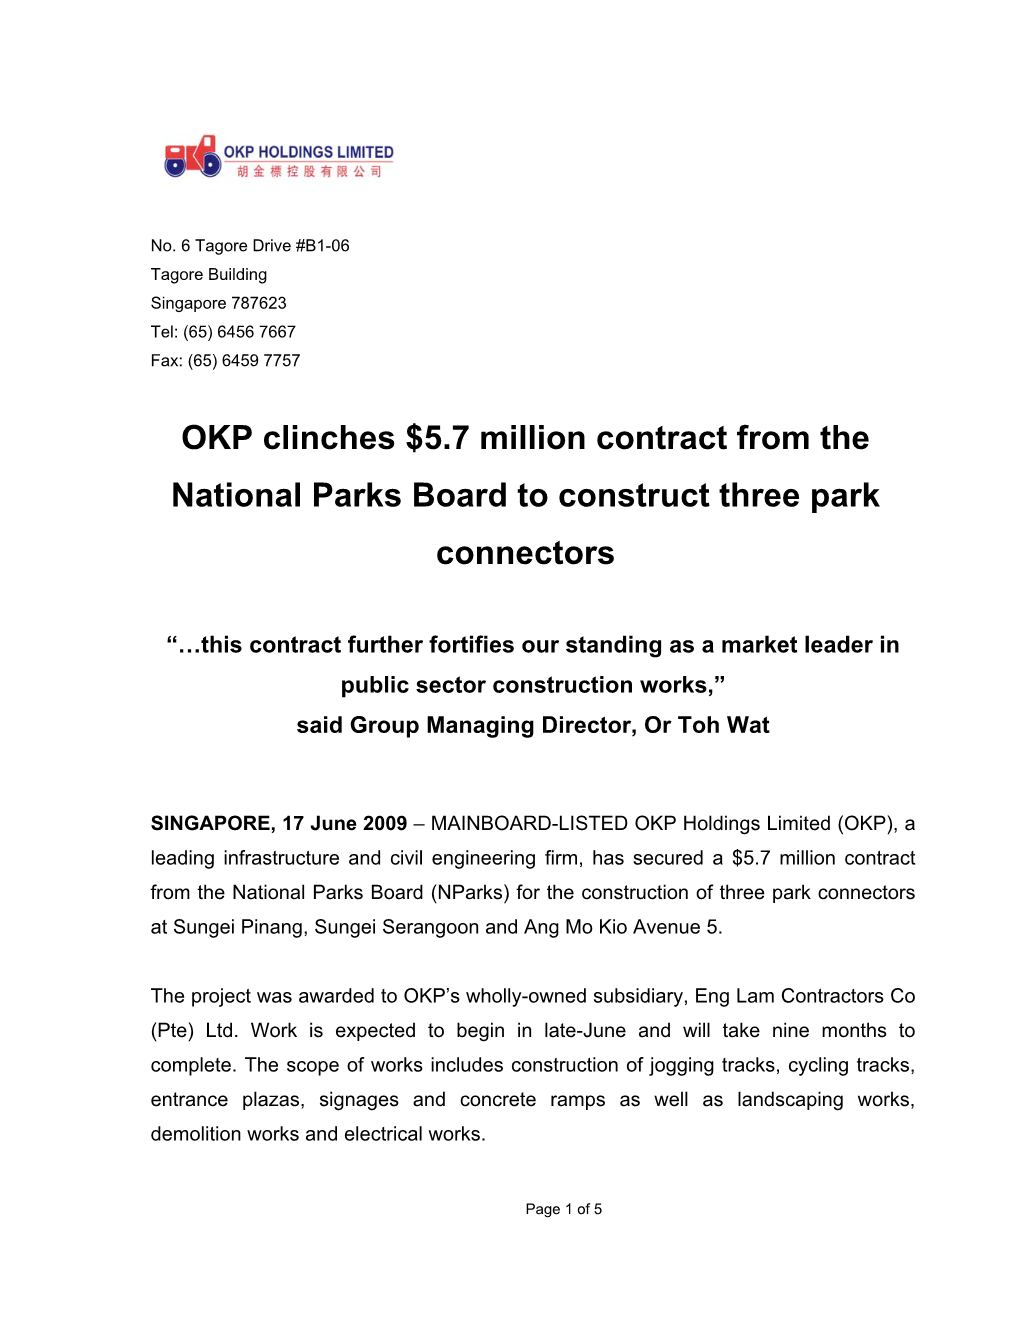 OKP Clinches $5.7 Million Contract from the National Parks Board to Construct Three Park Connectors